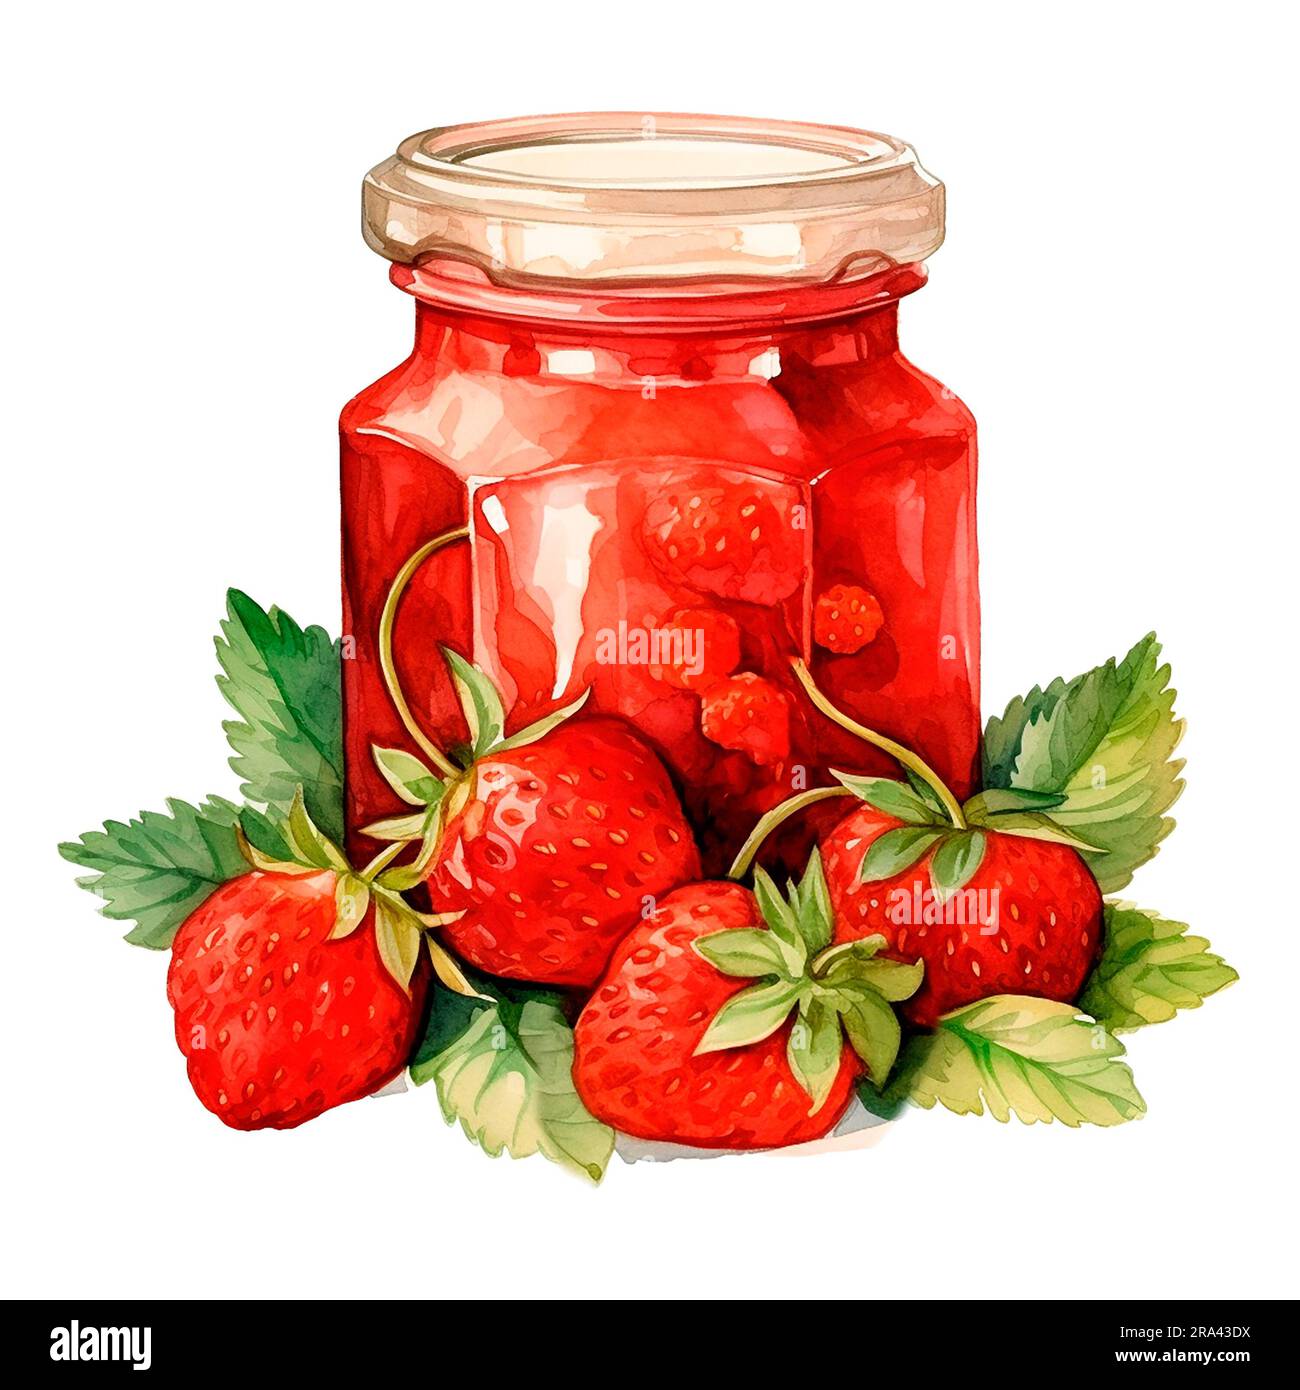 Strawberry jam in glass jar with strawberries. Watercolor illustration isolated on white background Stock Photo